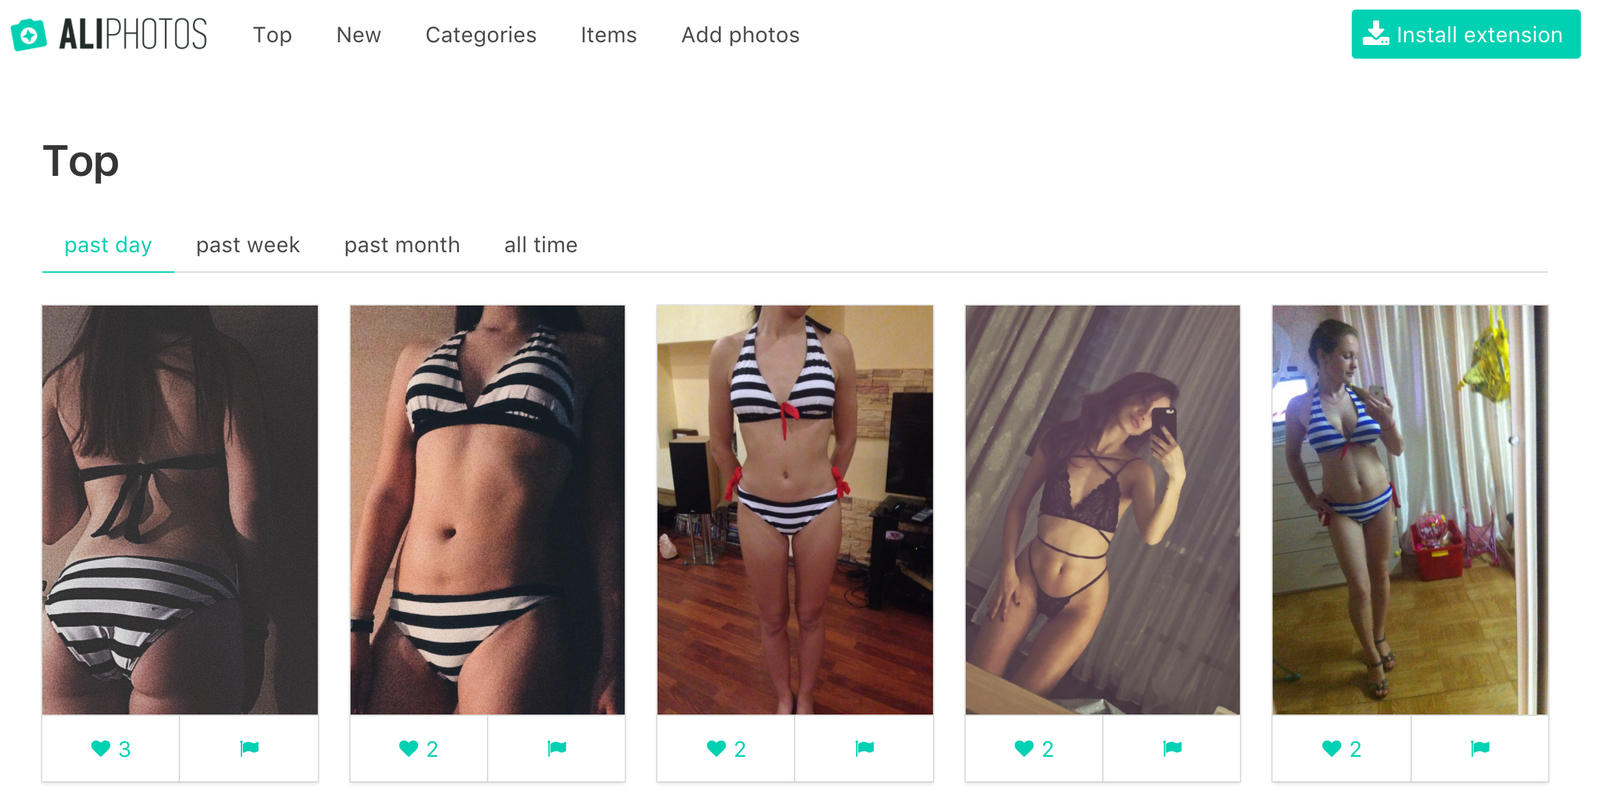 Aliexpress reviews image grabber 2.0 - Review, Parser, Images, AliExpress, My, NSFW